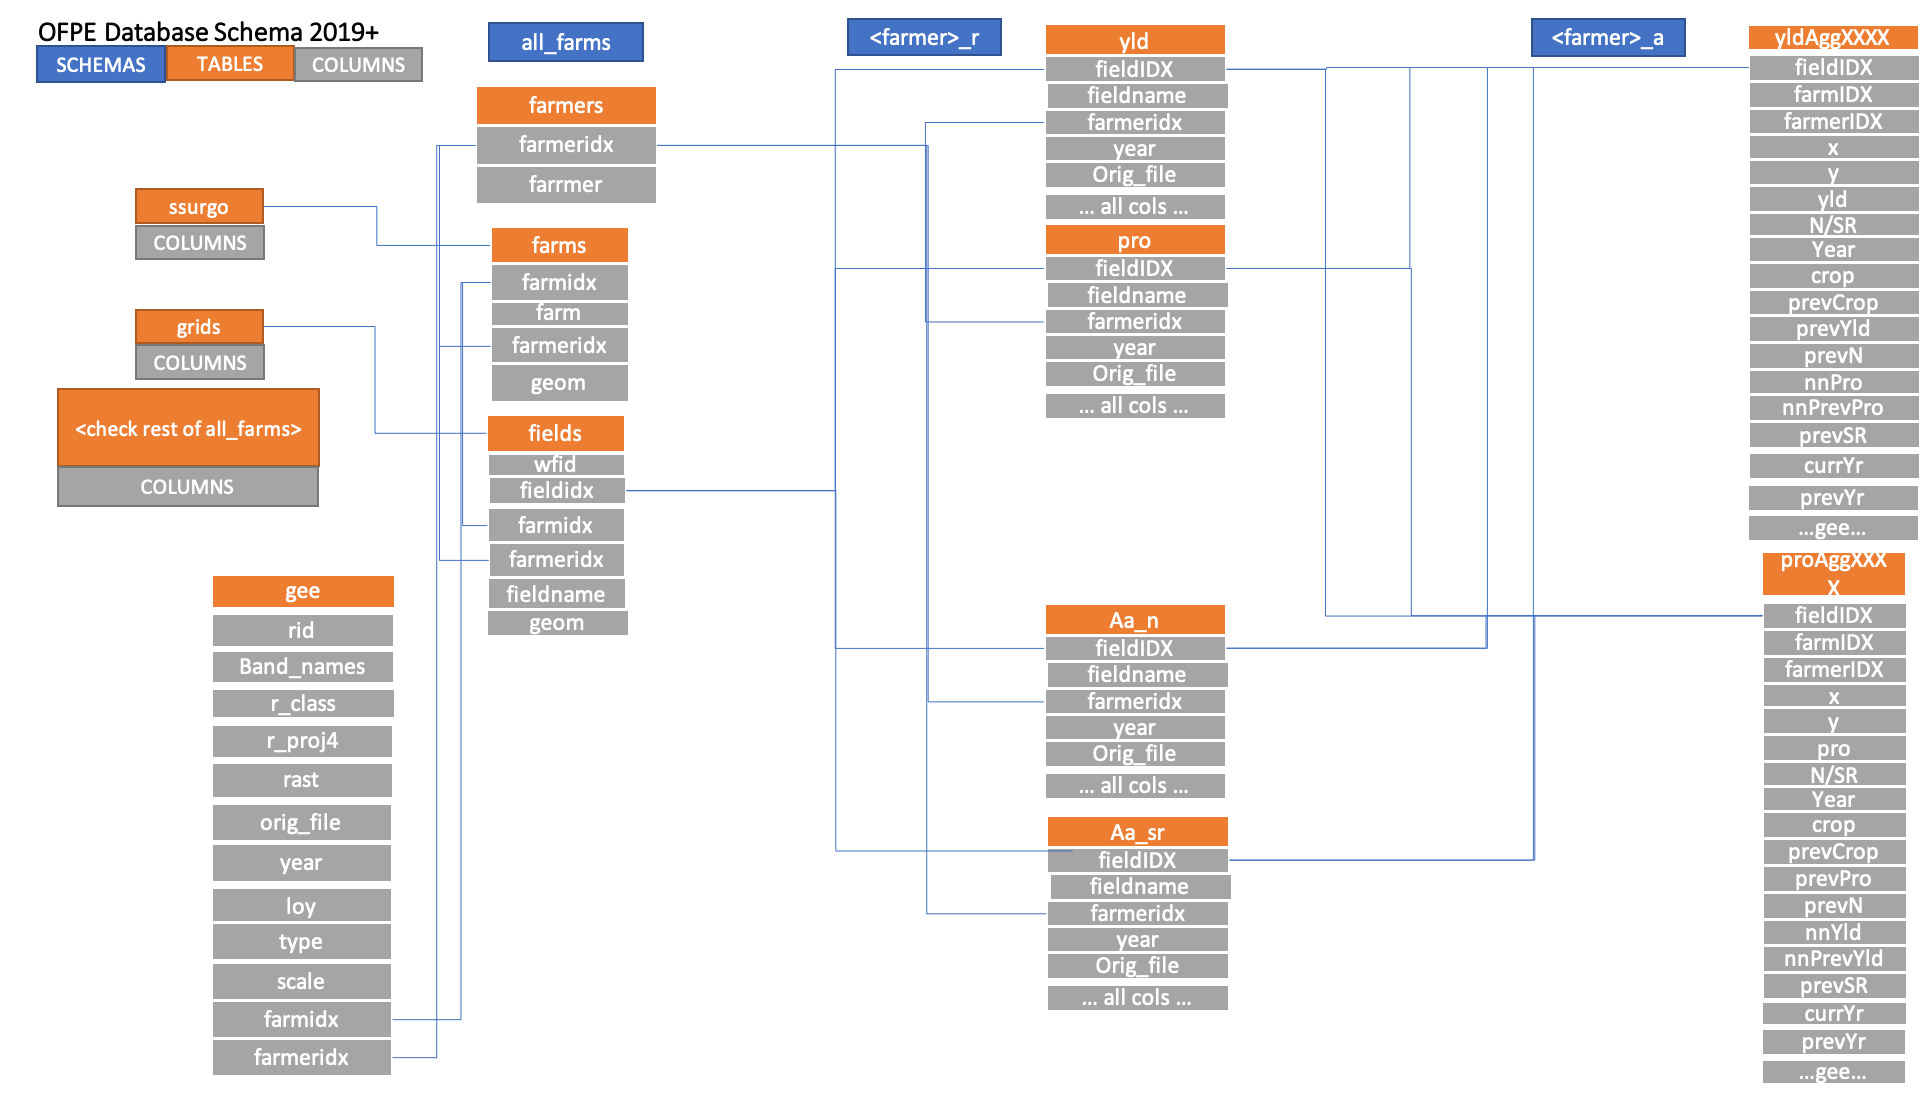 **Figure 2.** TODO: Update figure.** OFPE database schematic. Legend is in top left. Blue boxes represent schemas within the database. Orange boxes represent tables within schemas, and grey boxes are columns within each table. Demonstrates the relational aspect of the database. *The column names shown are not an exhaustive list of columns present in actual data.* 